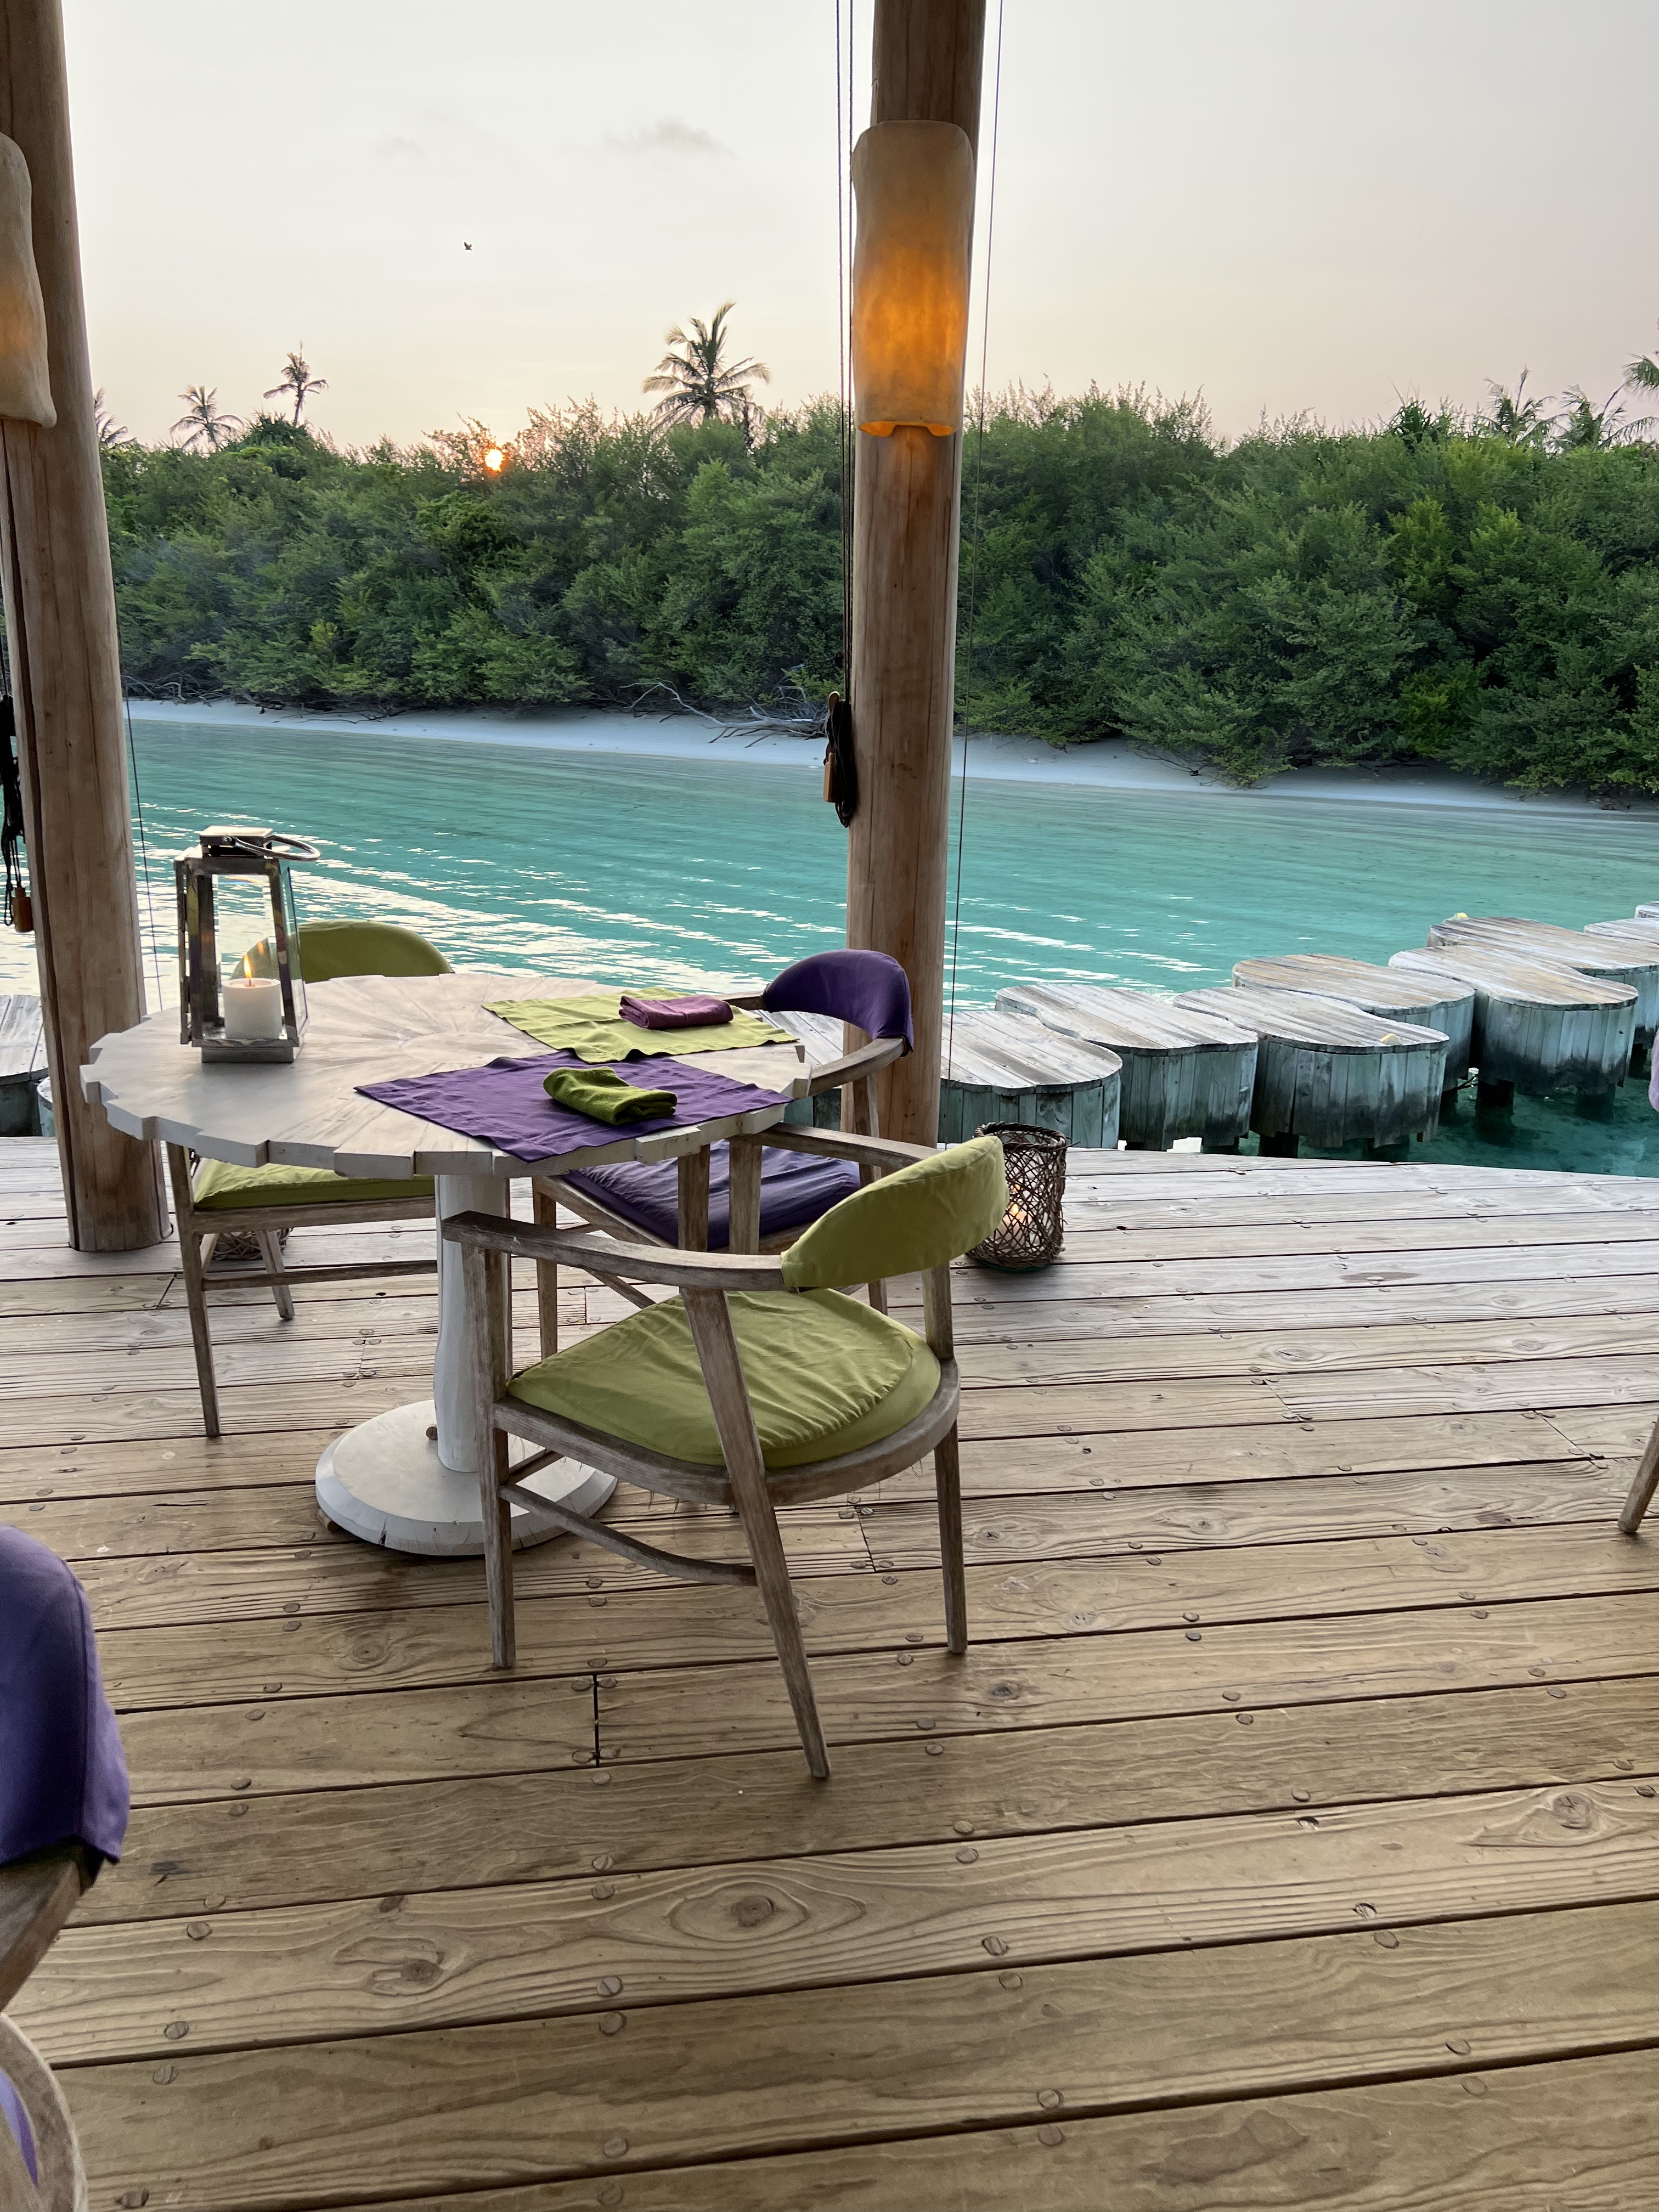 Soneva Jani's spectacular Director's Cut where you can enjoy a set meal while you watch a film at the overwater silent cinema